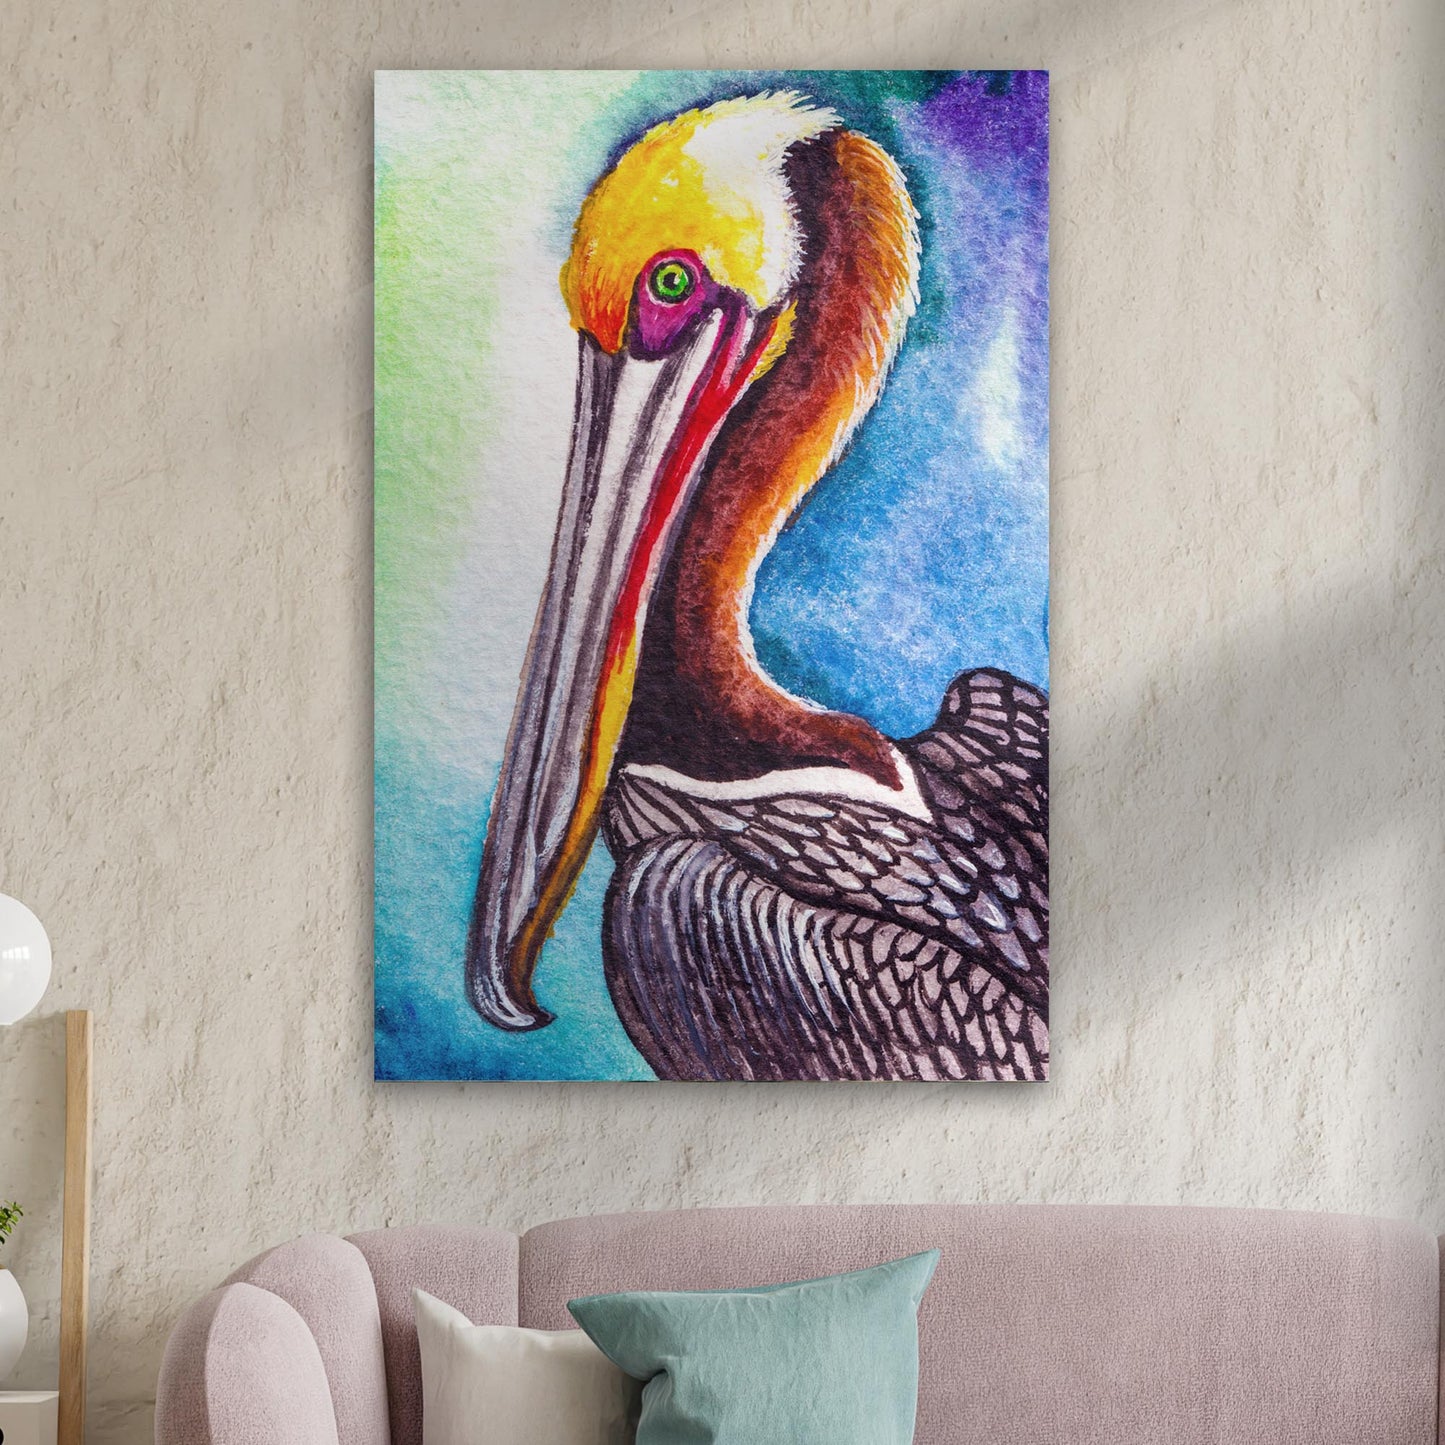 Pelican Painting "The Fish Catcher" Canvas Wall Art - Image by Tailored Canvases